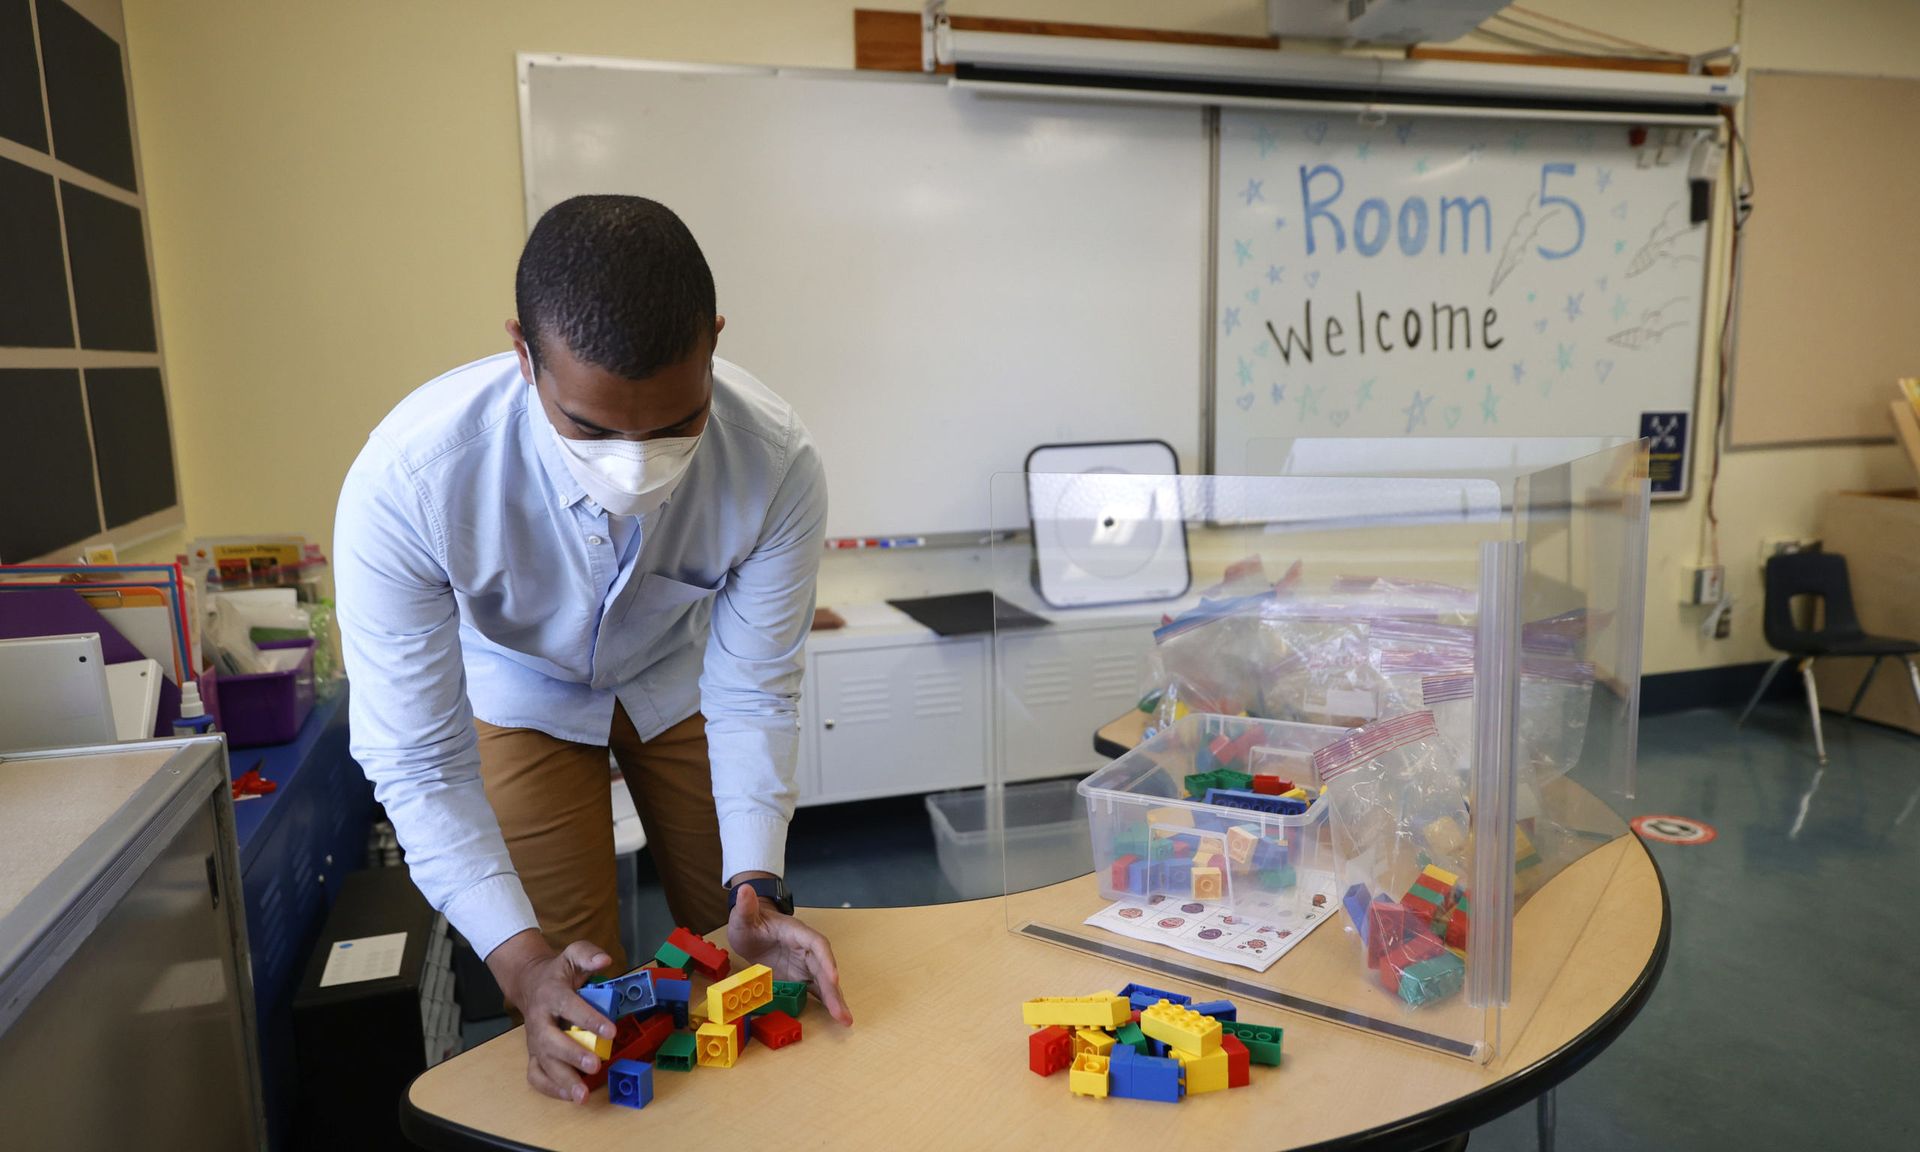 Bryant Elementary School kindergarten teacher Chris Johnson sets up his classroom on April 09, 2021 in San Francisco, California. The San Francisco Unified School District is preparing to gradually return students back to classrooms next week. (Photo by Justin Sullivan/Getty Images)